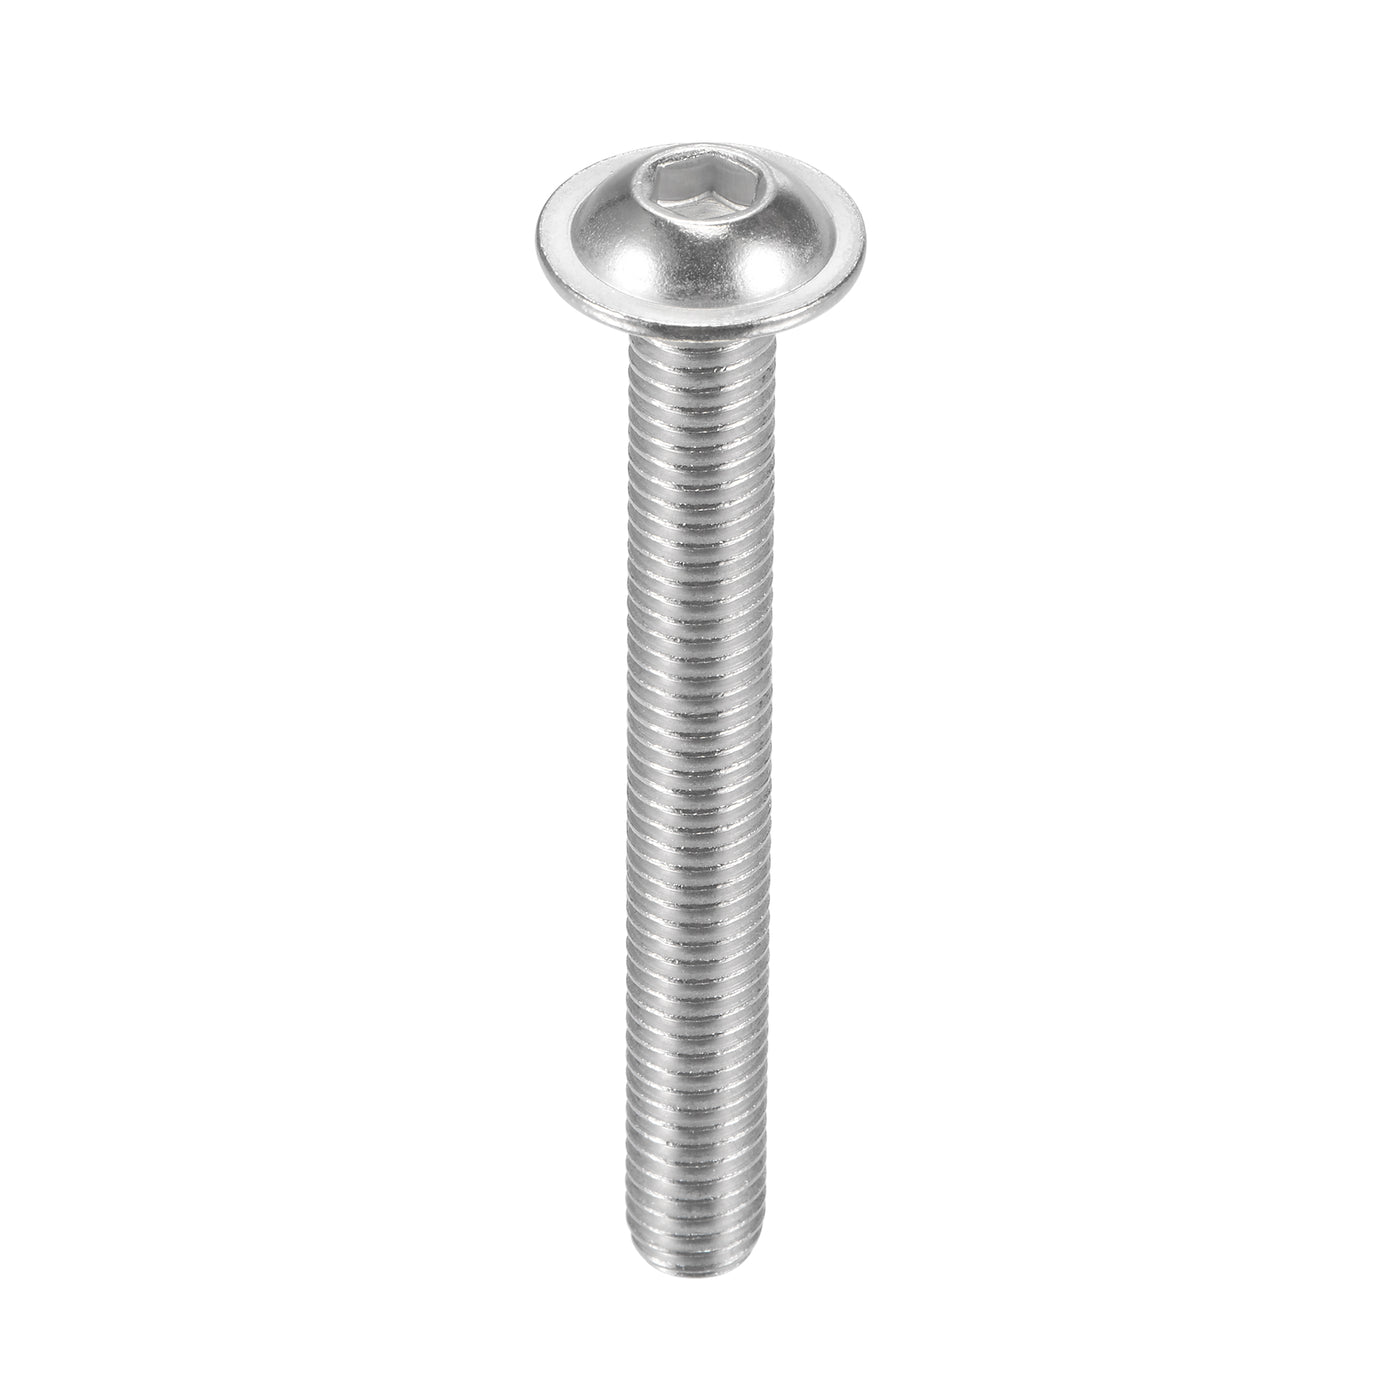 Uxcell Uxcell M8x65mm 304 Stainless Steel Flanged Button Head Socket Cap Screws 10pcs